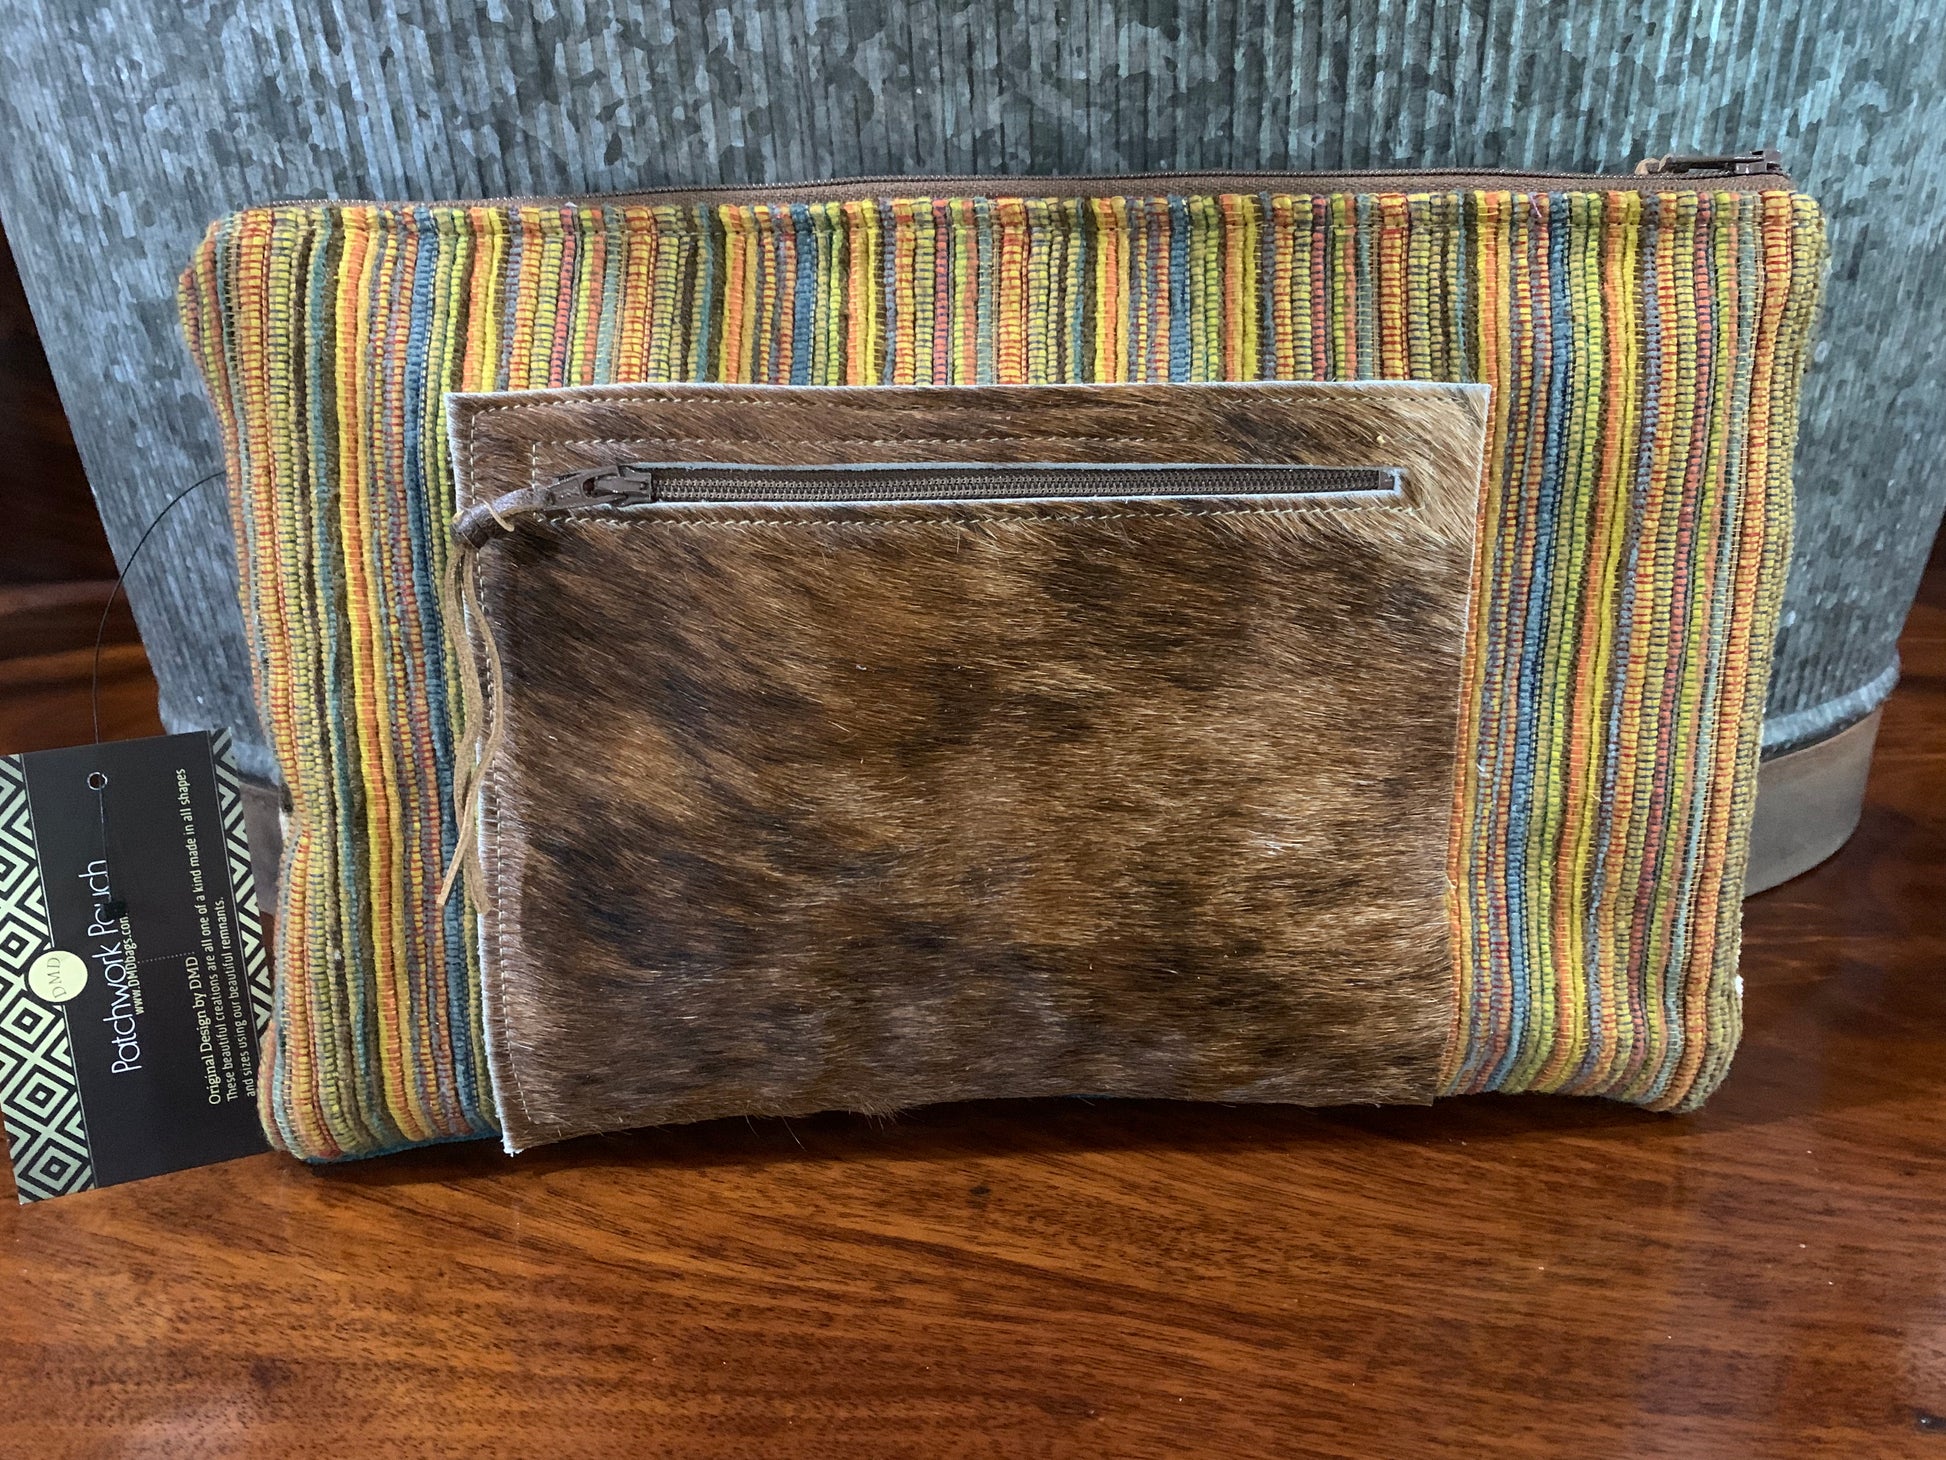 Patchwork Pouch with Cowhide Zipper pocket - DMD Bags